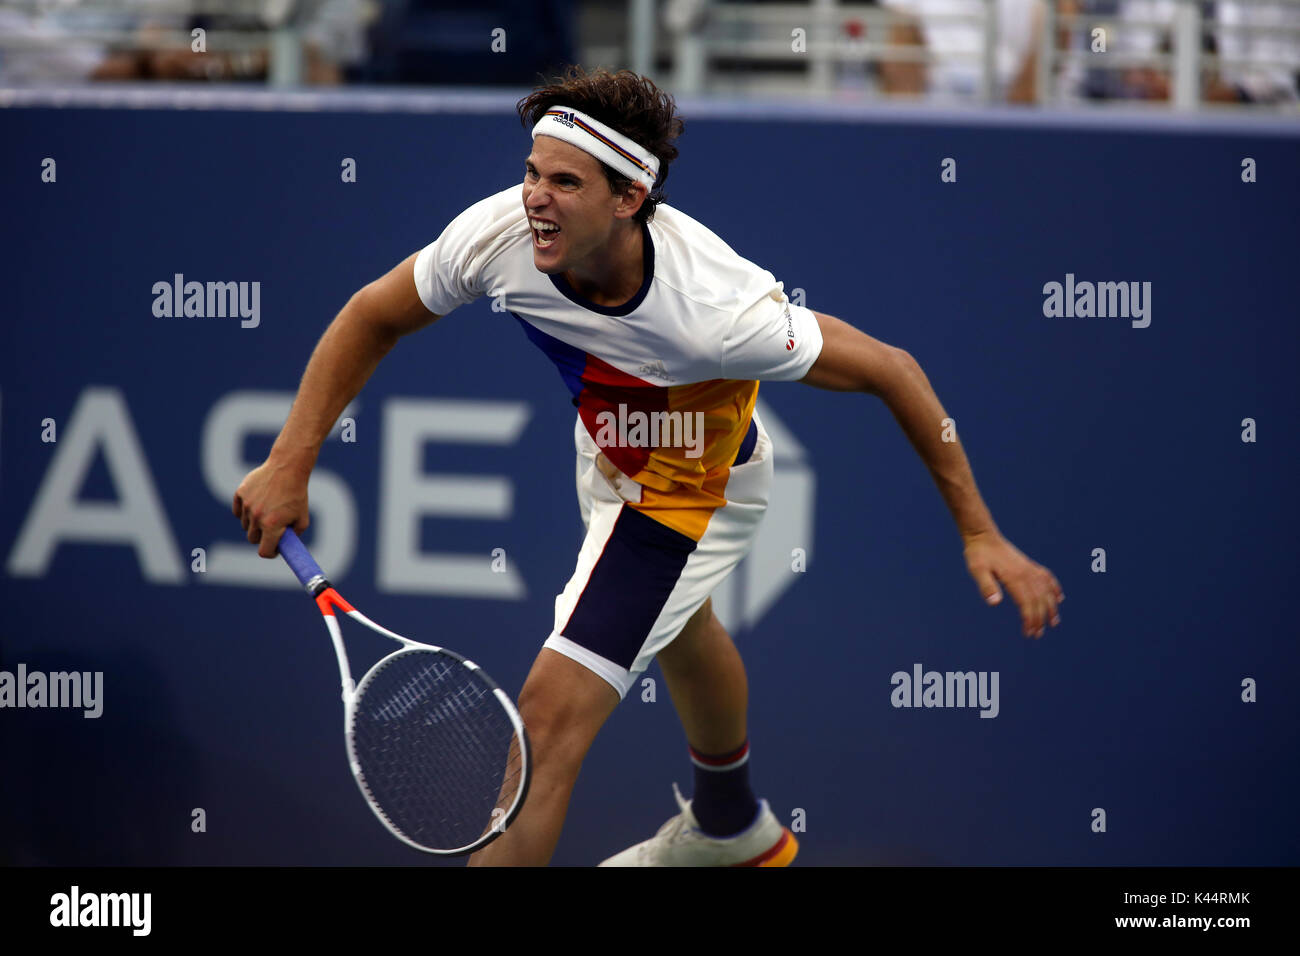 New York, United States. 04th Sep, 2017. US Open Tennis: New York, 4 September, 2017 - number 6 seeded Dominic Thiem of Austria serves during his fourth round match against Juan Martin del Potro of Argentina at the US Open in Flushing Meadows, New York. del Potro won the match in five sets to advance to the quarterfinals. Credit: Adam Stoltman/Alamy Live News Stock Photo